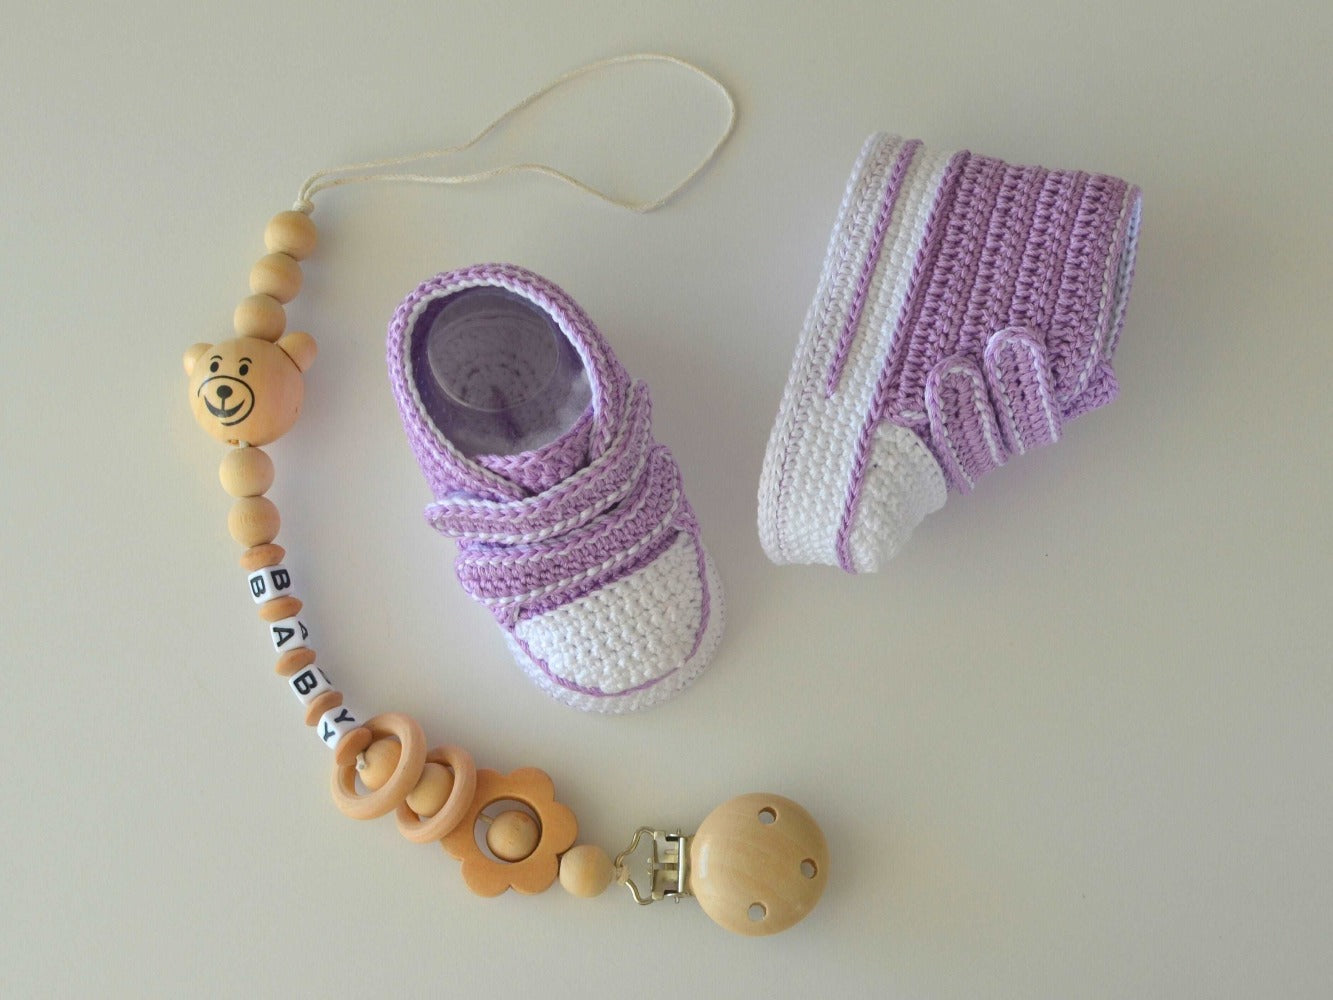 Soft cotton baby booties with detailed crochet pattern.